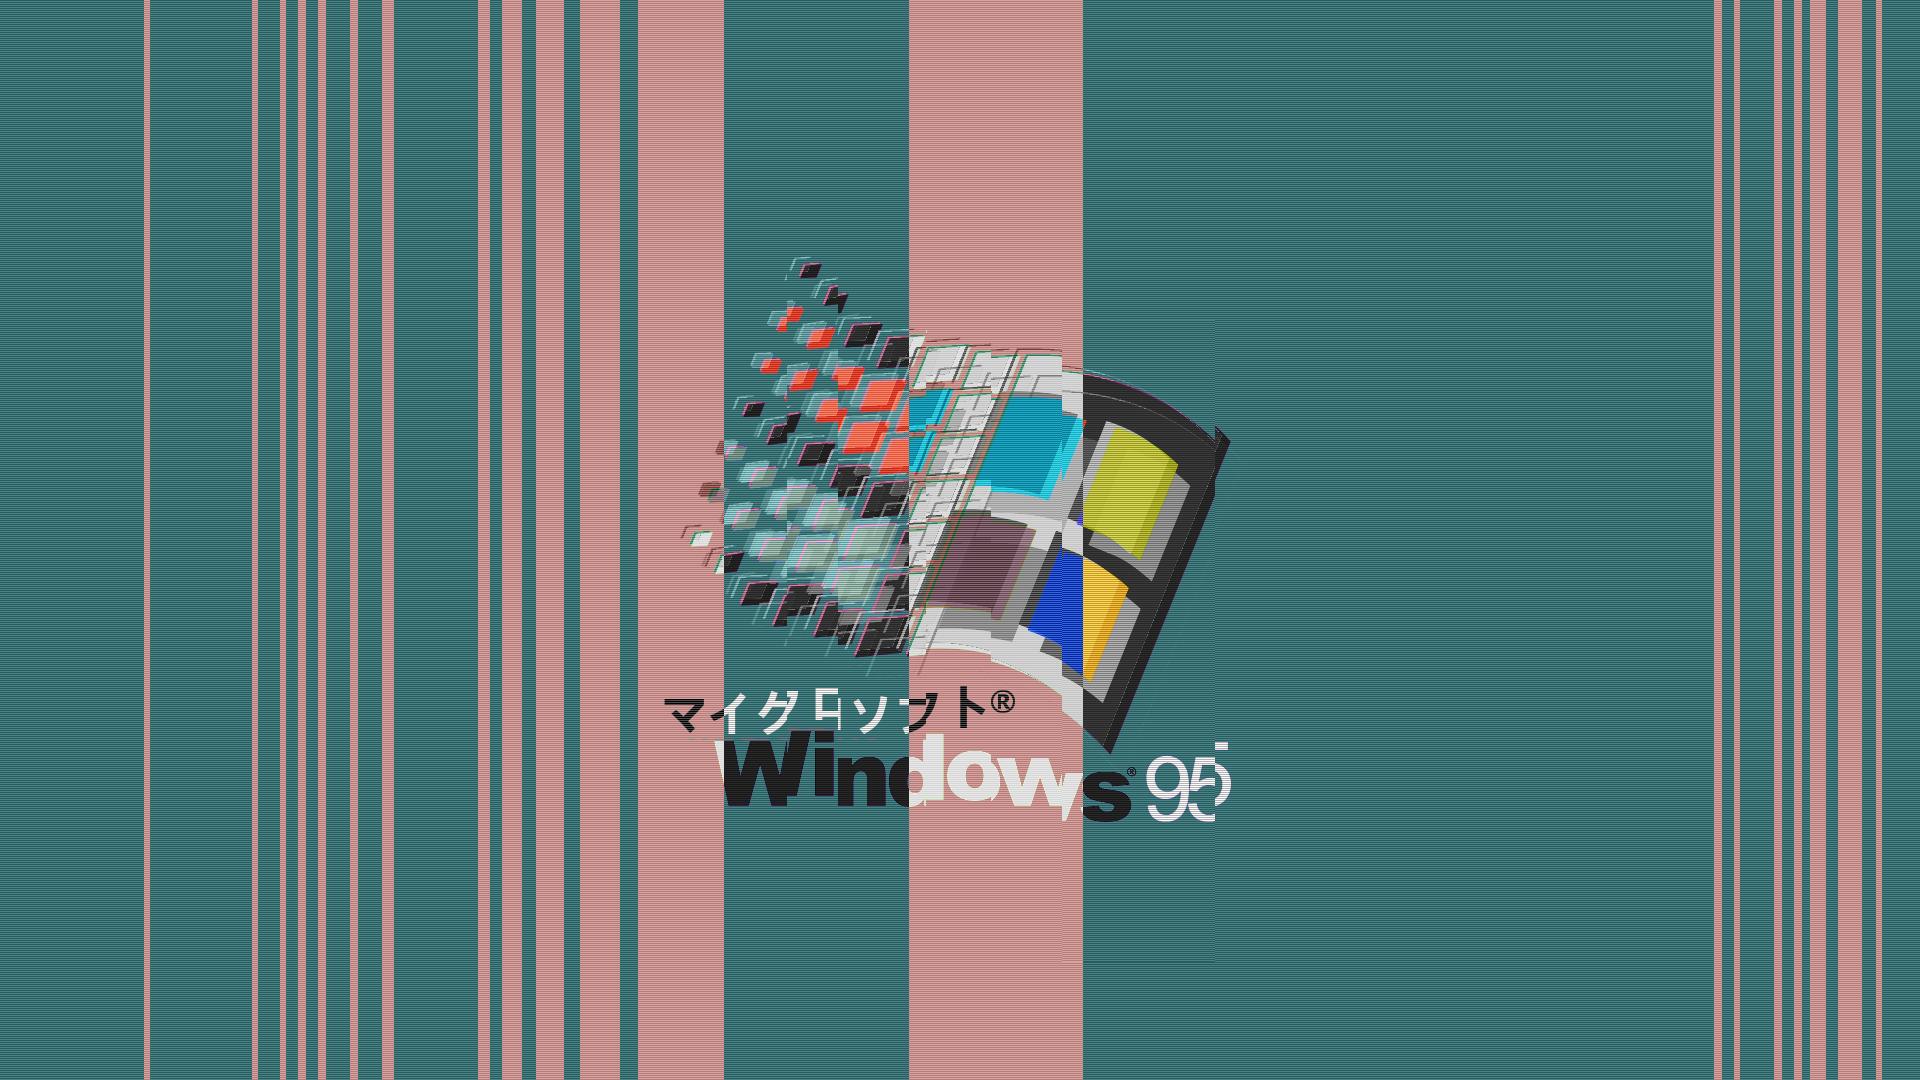 Windows 95 wallpaper with the classic startup sound - Windows 95